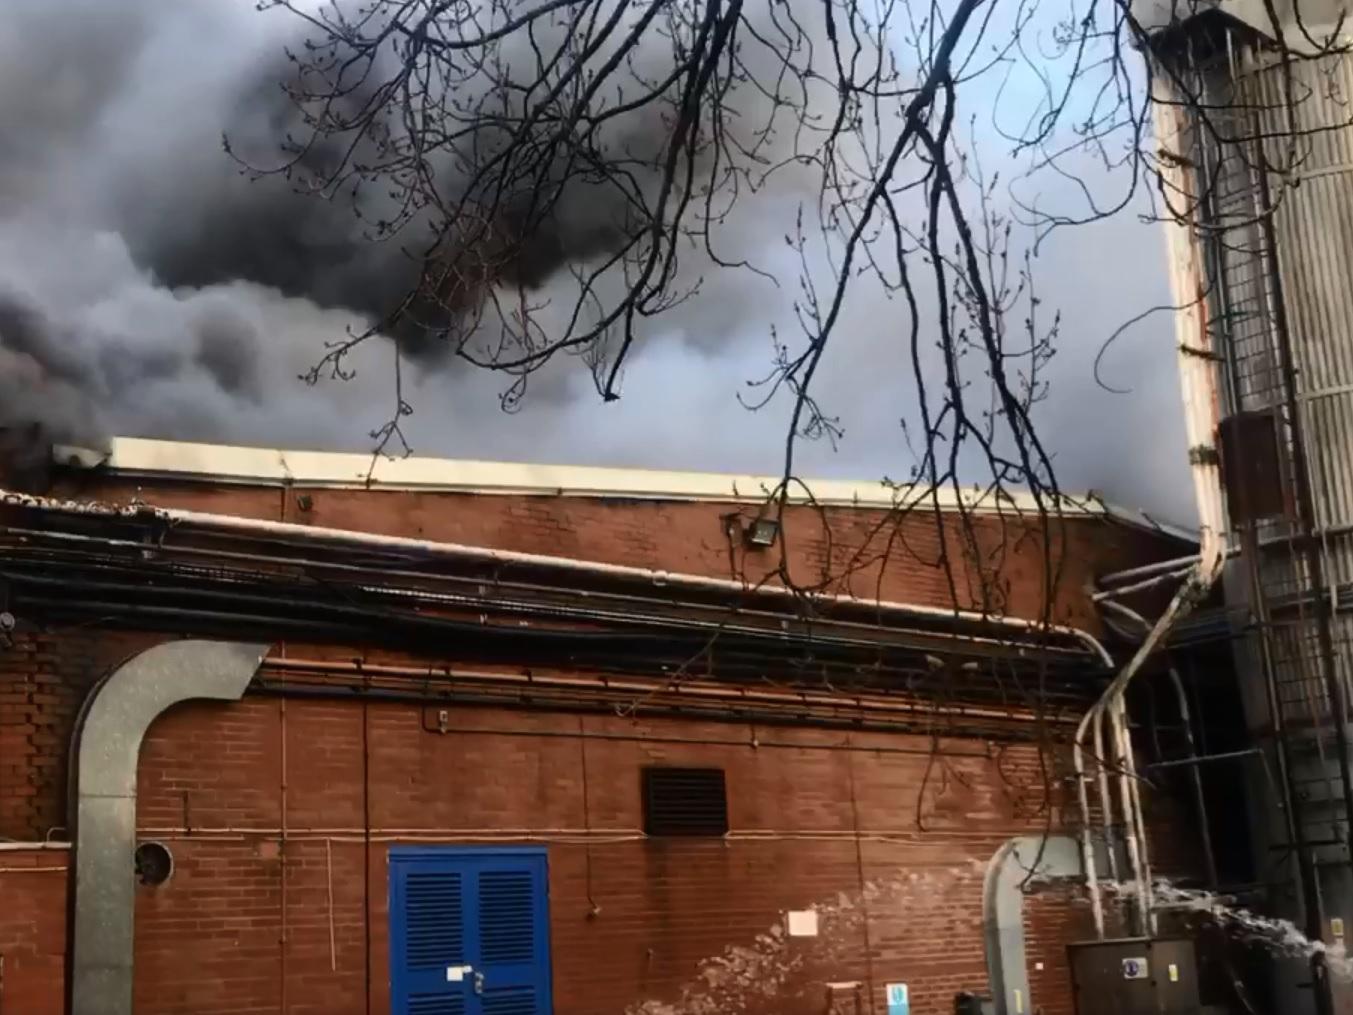 This still, taken from a video by David Bodden, shows fire crews tackling the blaze at the factory.